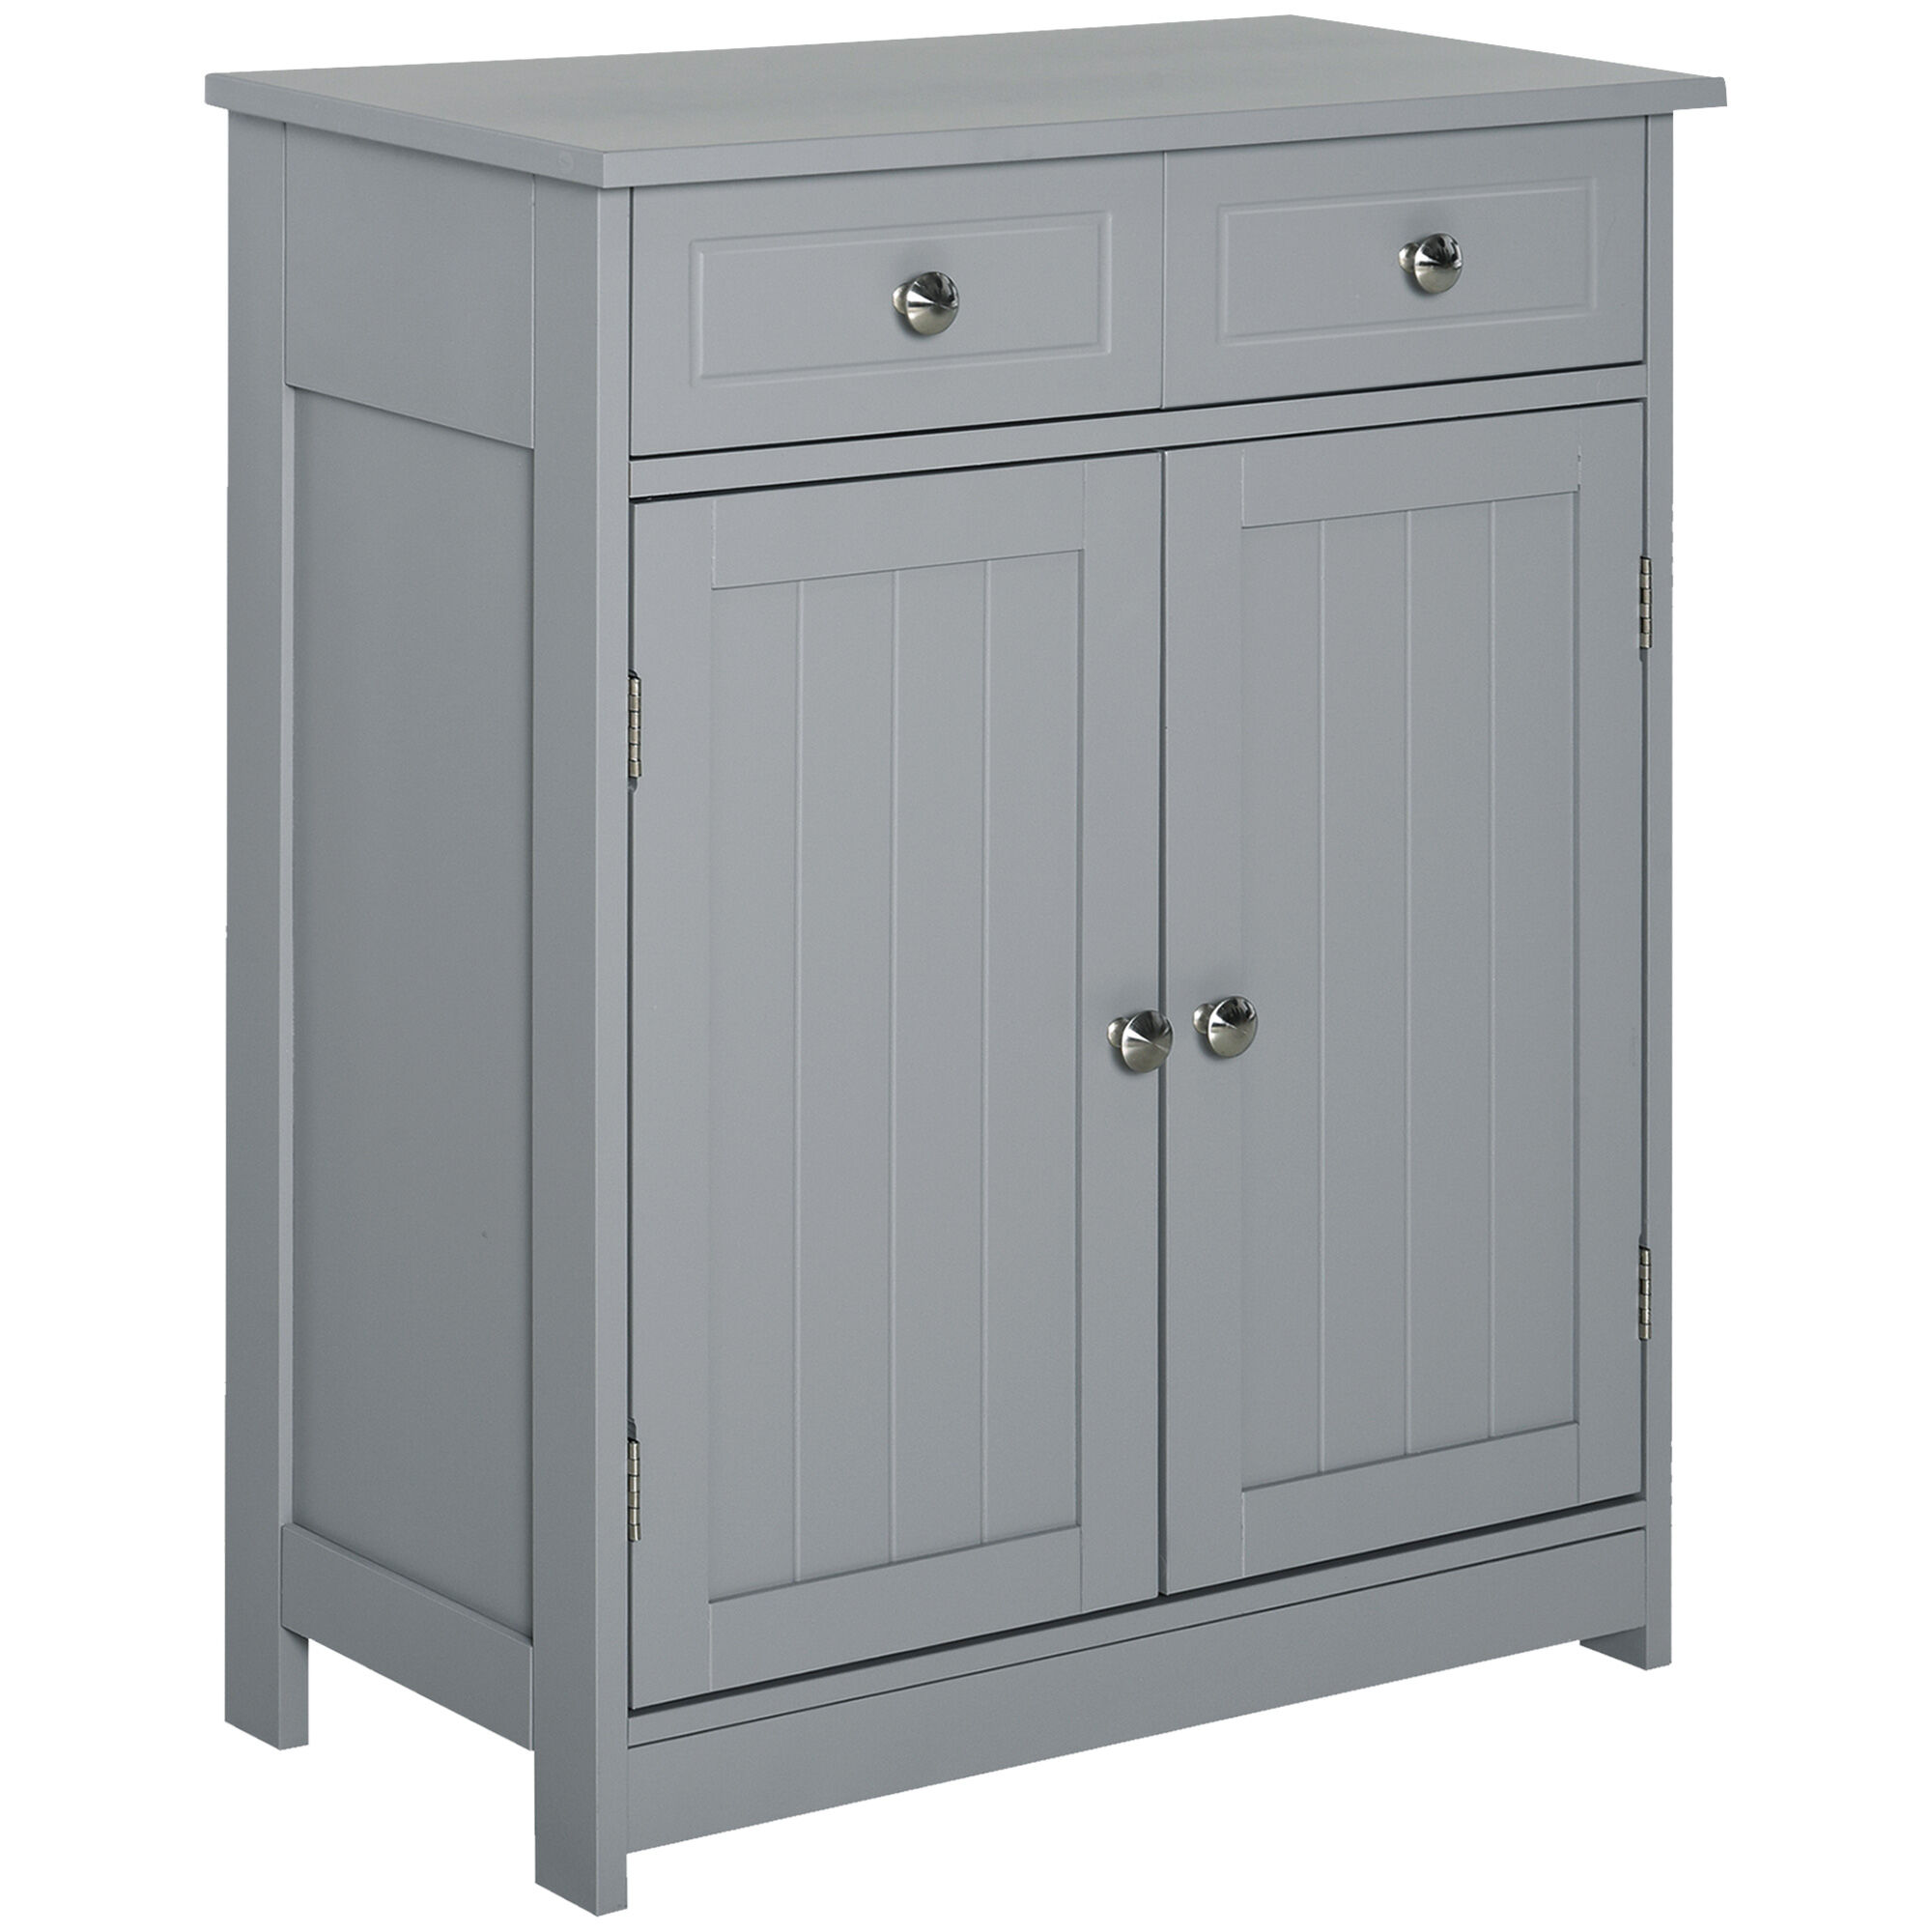 Kleankin Compact Freestanding Bathroom Linen Cabinet with 2 Drawers Metal Knob Elevated Base MDF Grey Storage Solution   Aosom.com